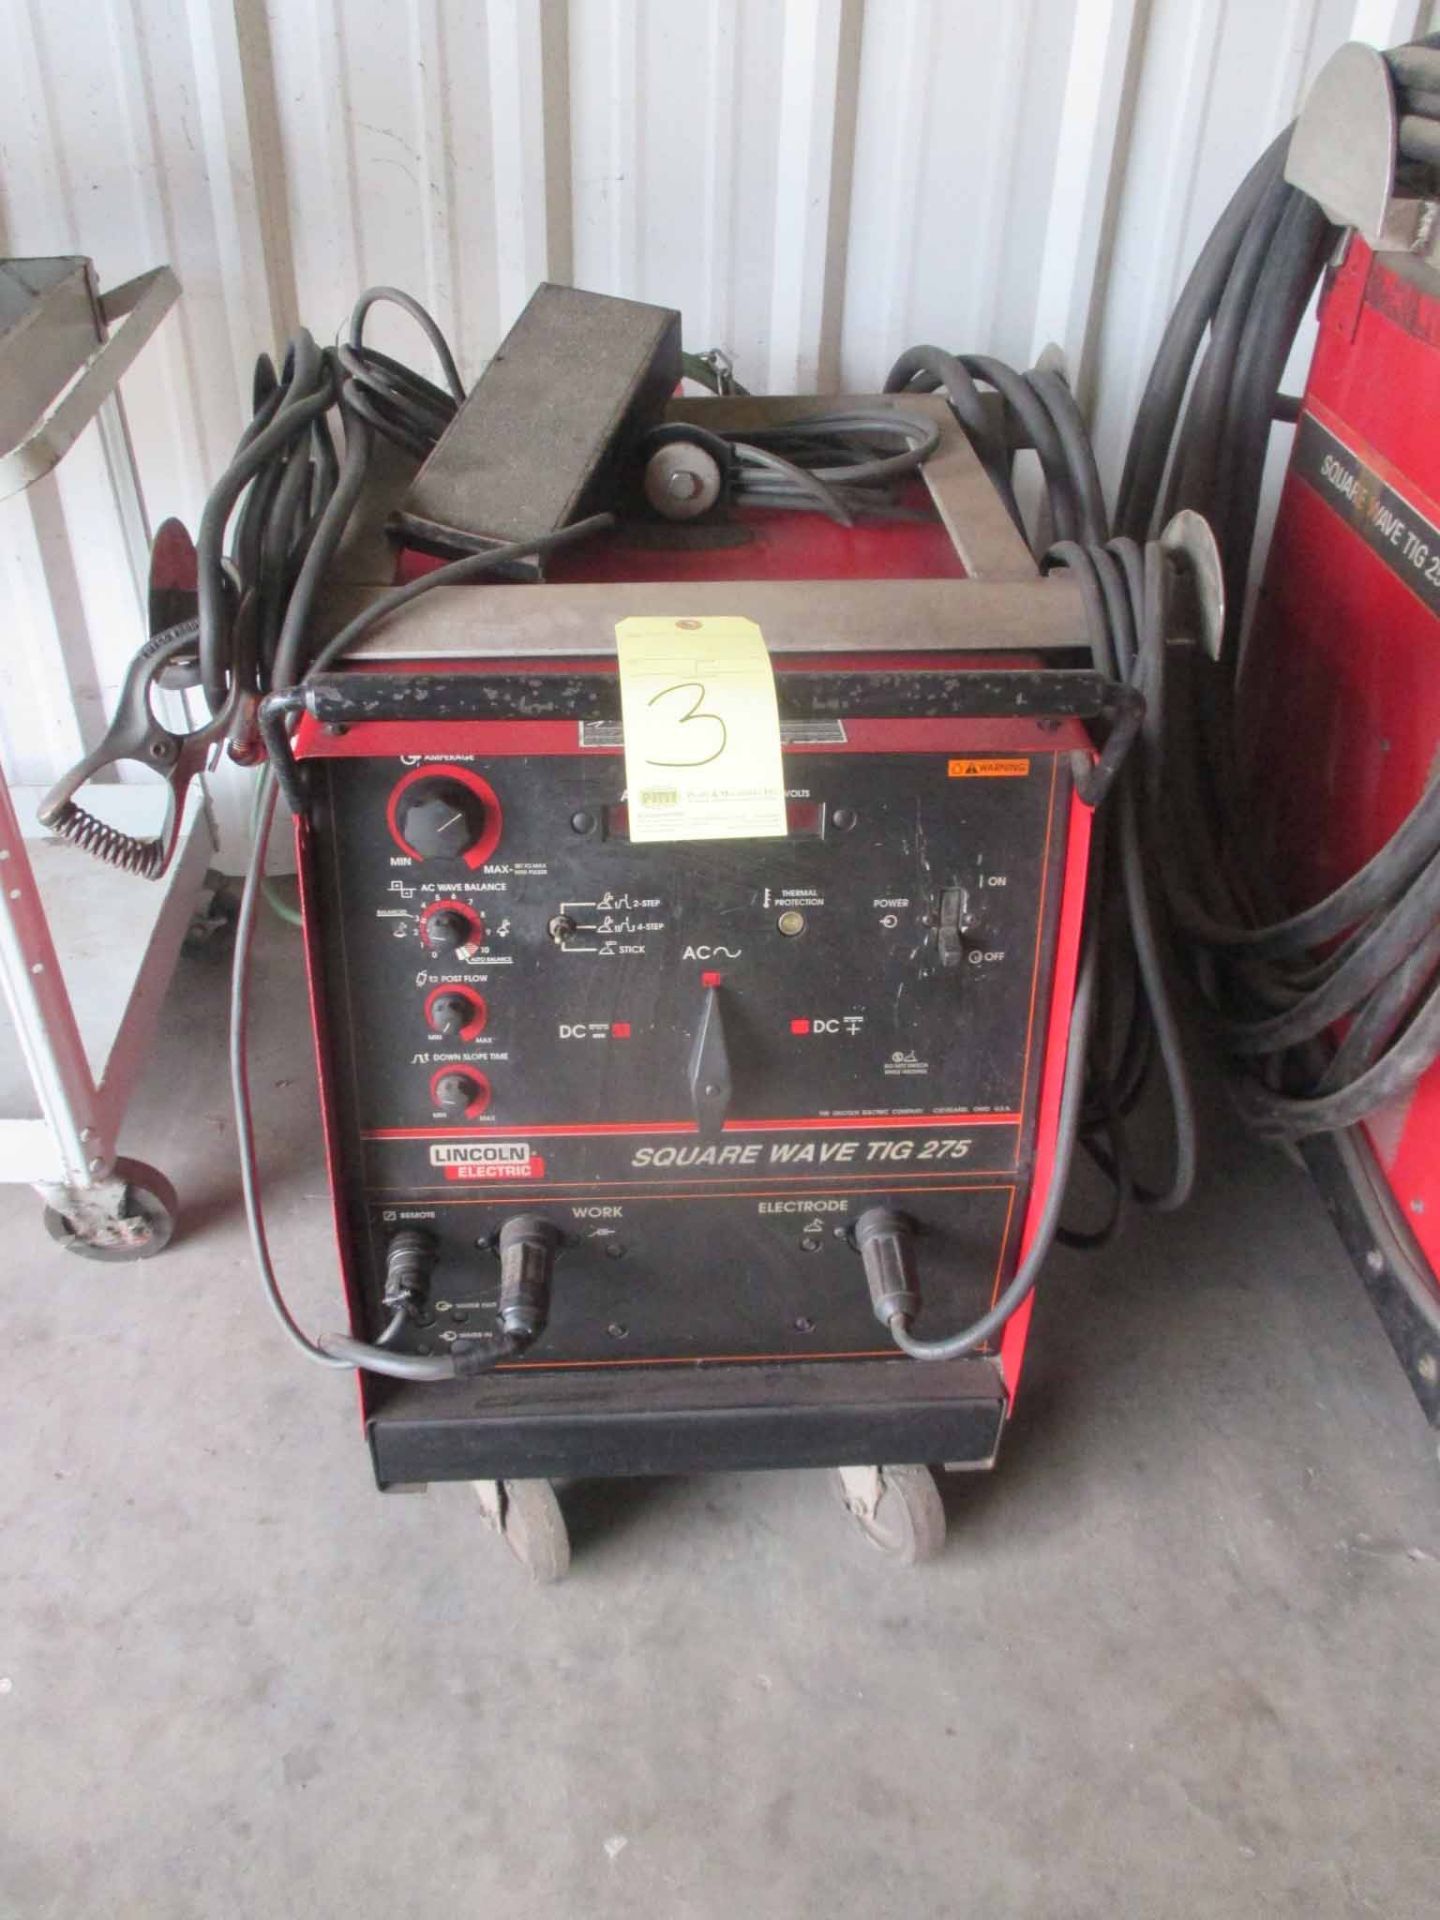 WELDER, LINCOLN SQUARE WAVE TIG 275, 40% duty cycle, 275 amps., 31 v., S/N U1991102075